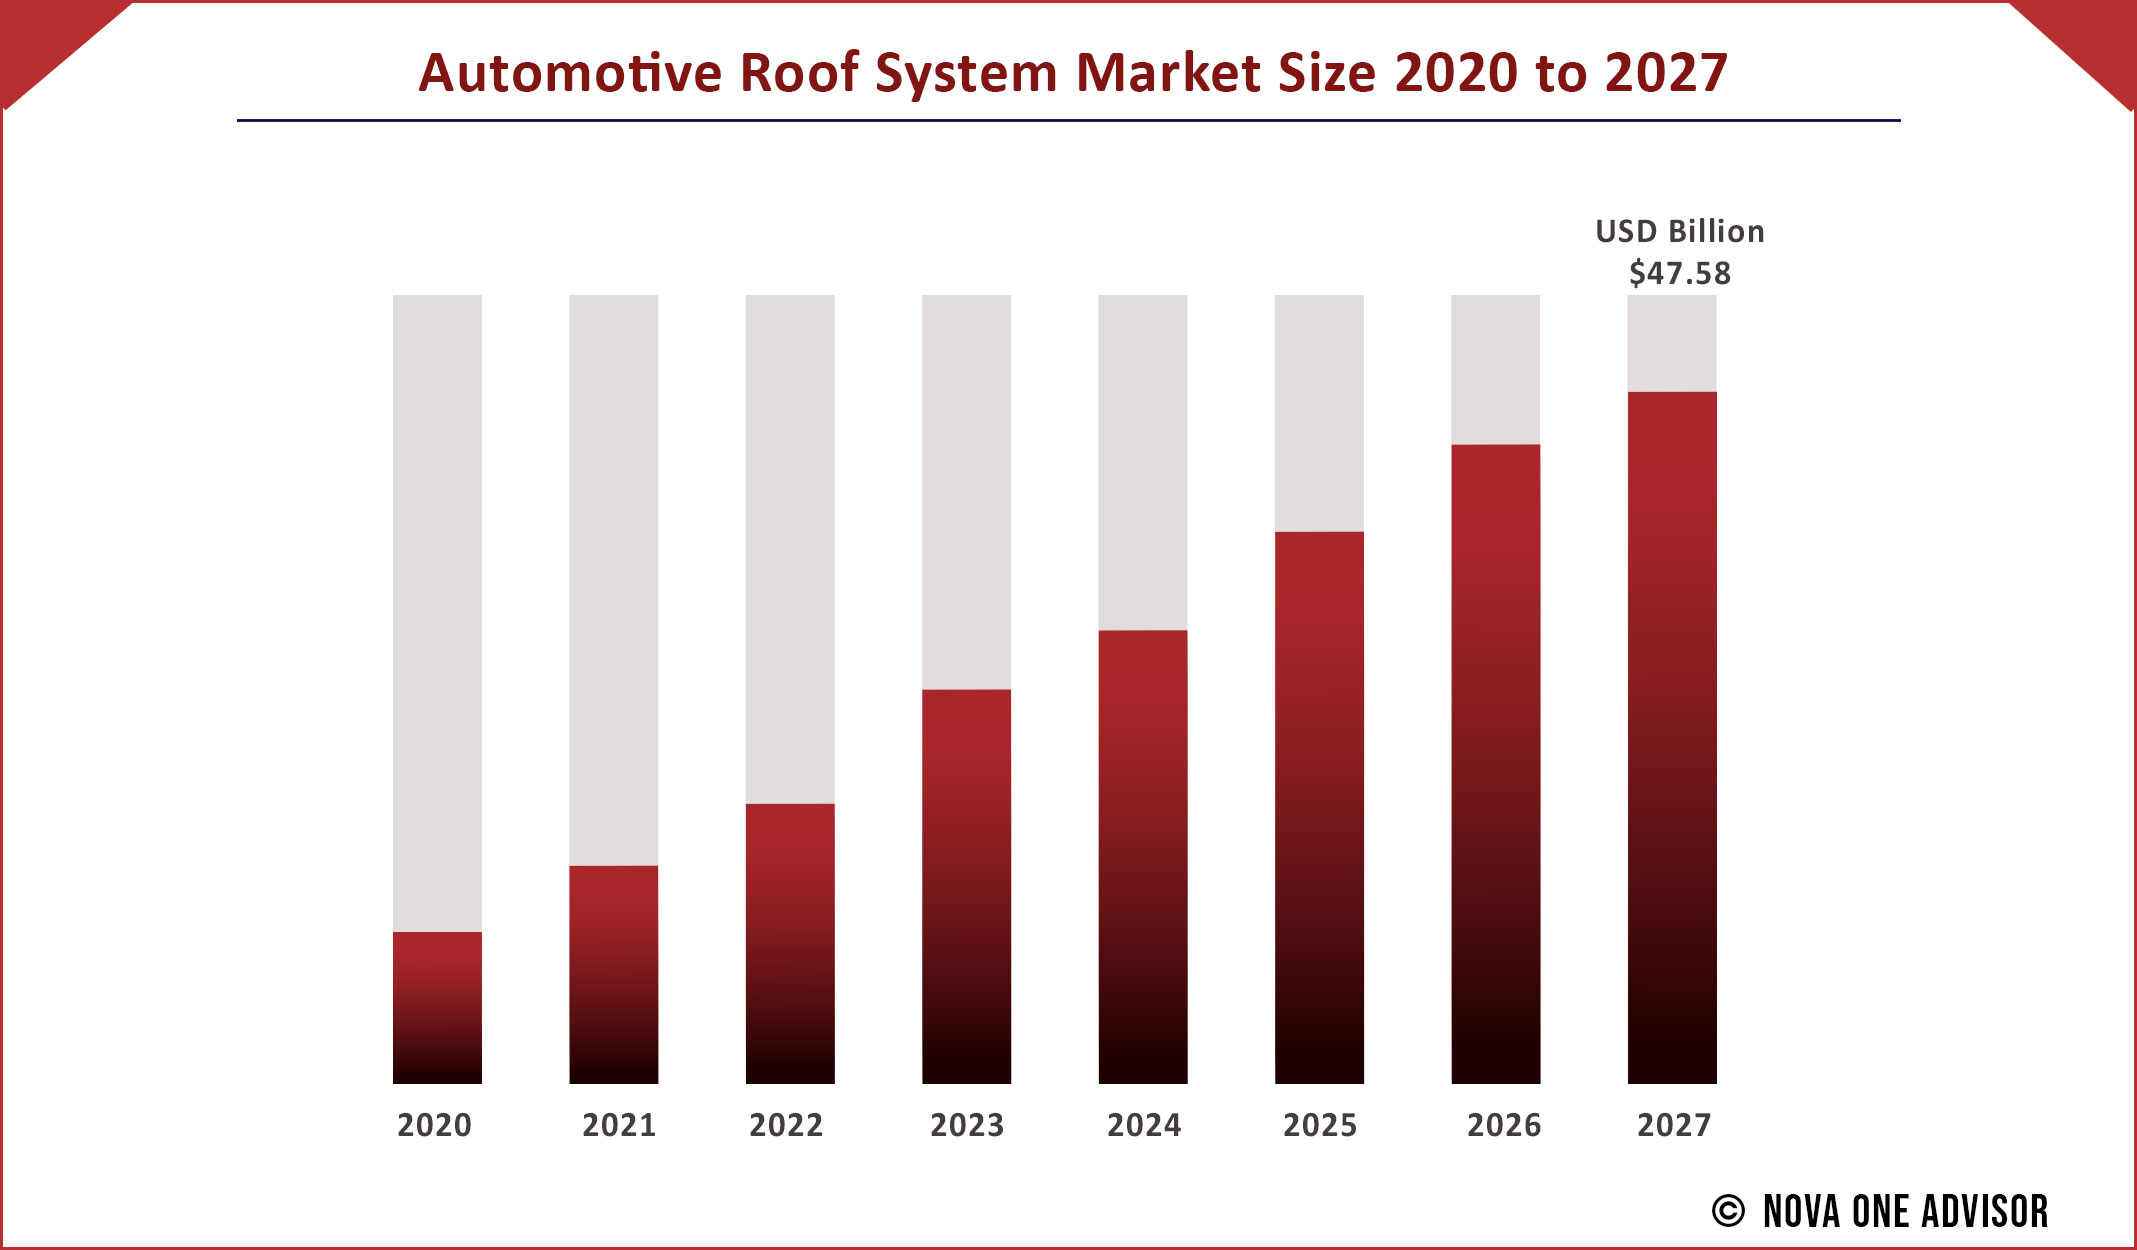 Automotive Roof System Market Size 2020 to 2027